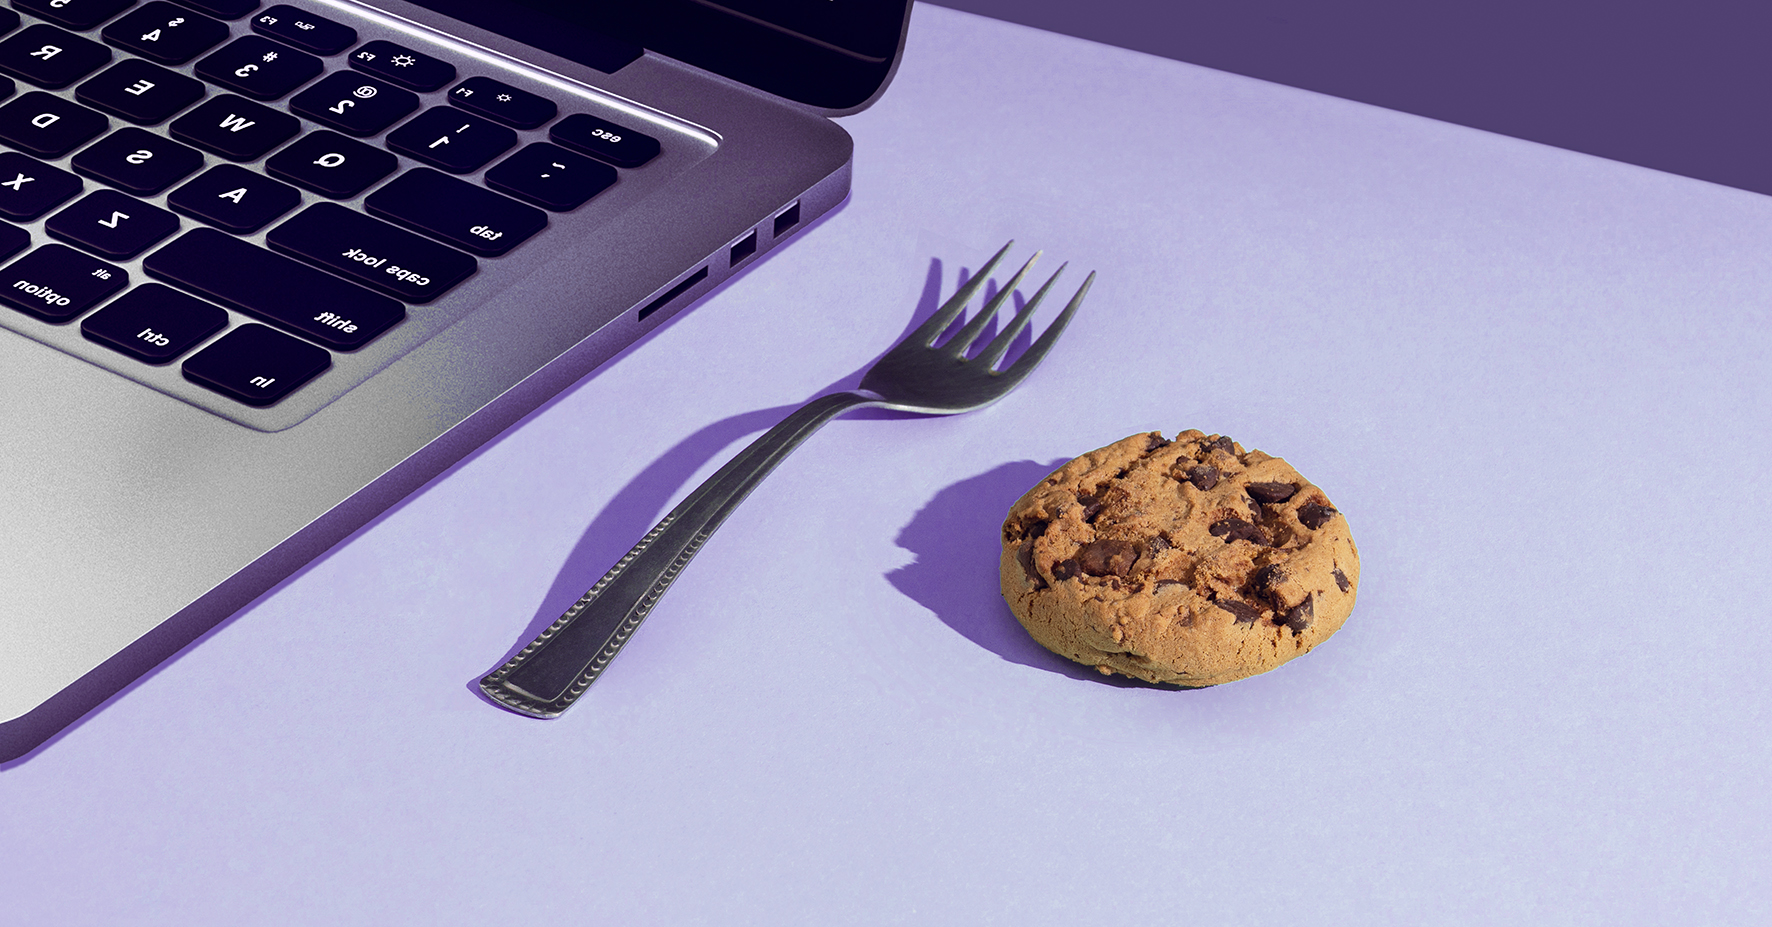 Cookie next to a fork next to a laptop